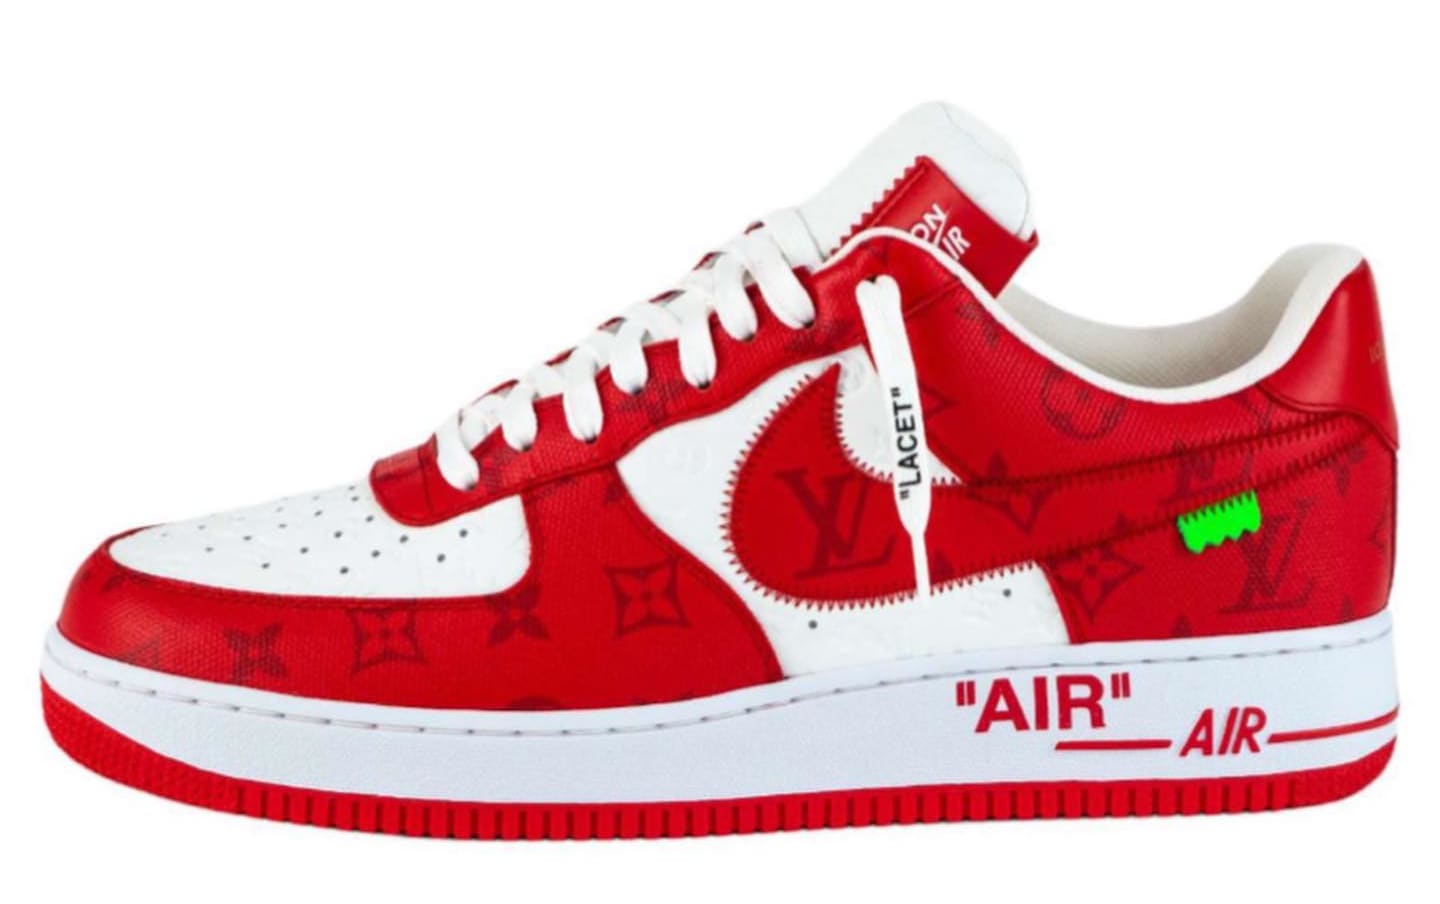 Louis Vuitton x Nike Air Force 1 Low White/Red